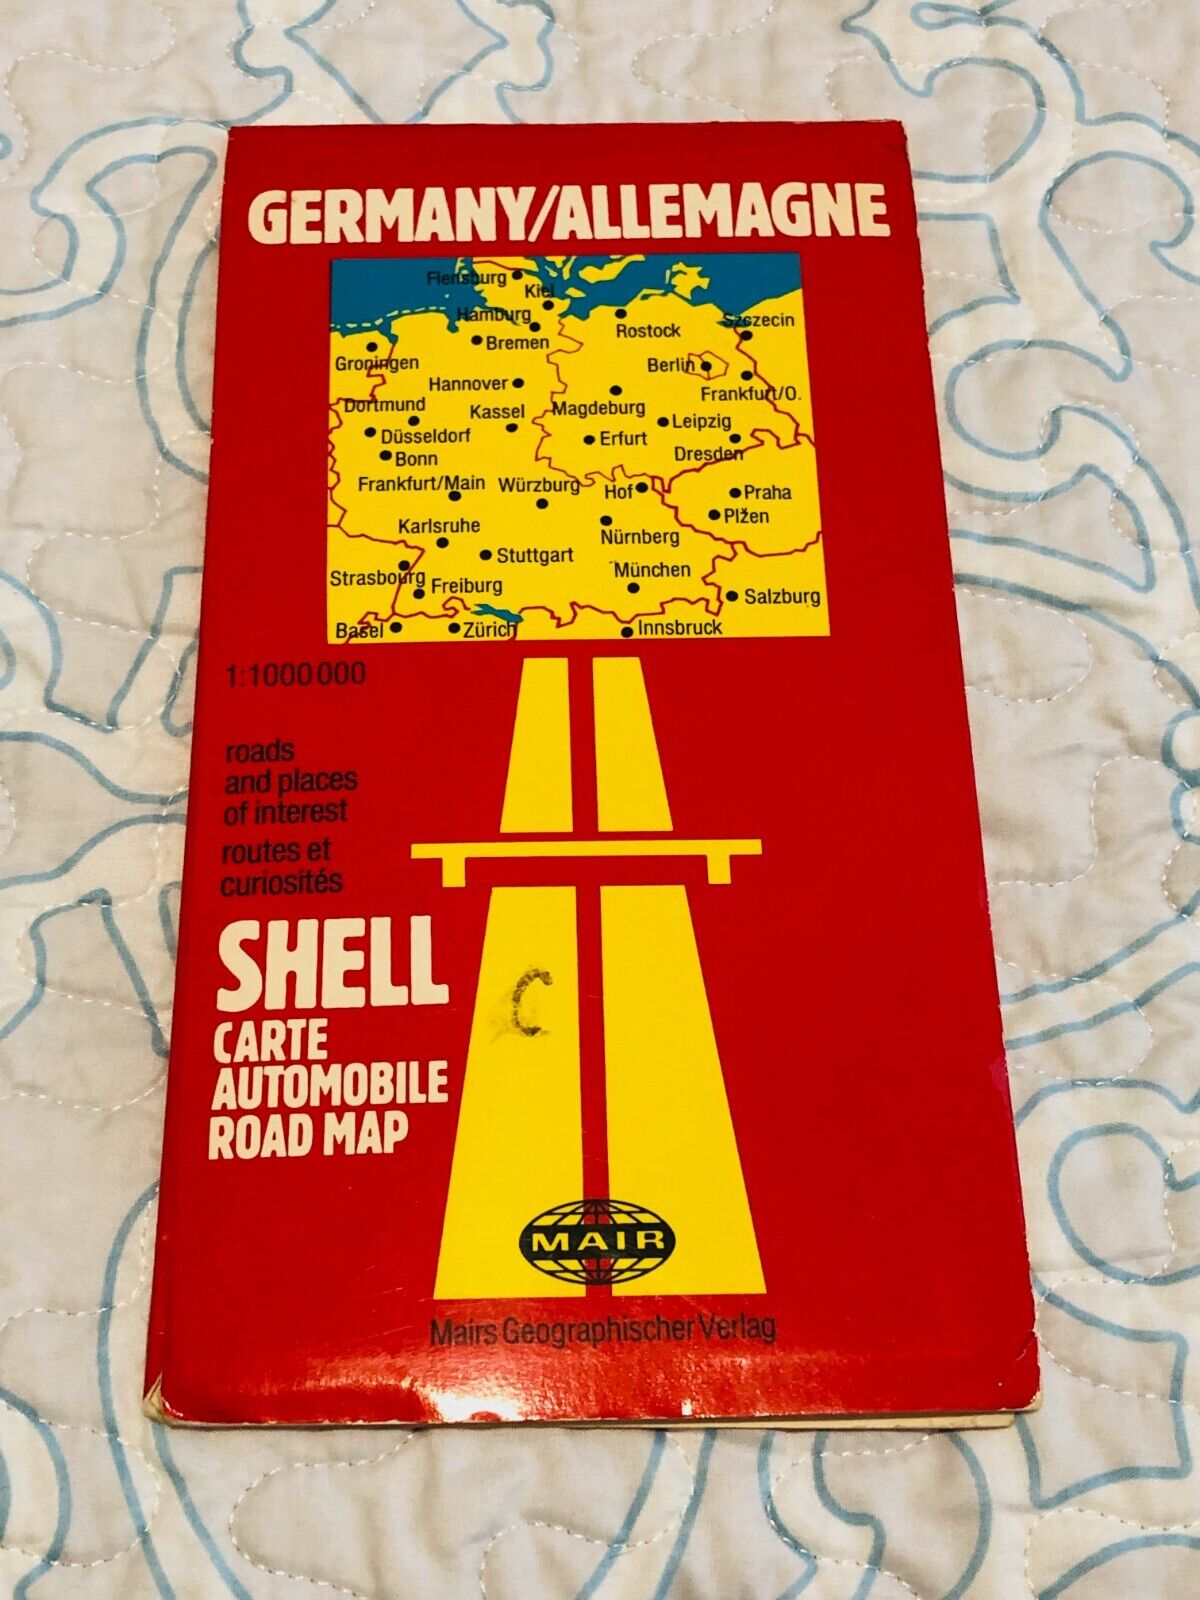 Vintage Germany Shell Automobile Road Map Mair Deutschland